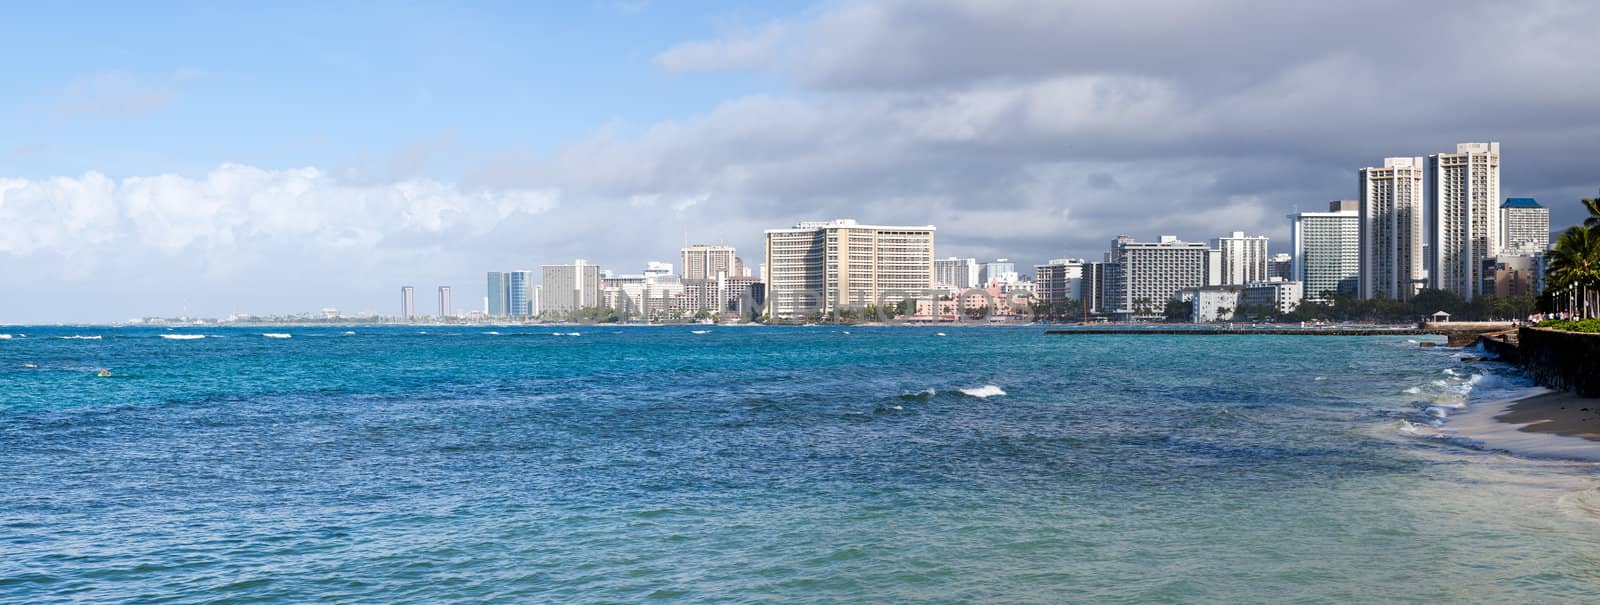 Panorama at sea level of the front at Waikiki in Oahu in Hawaii